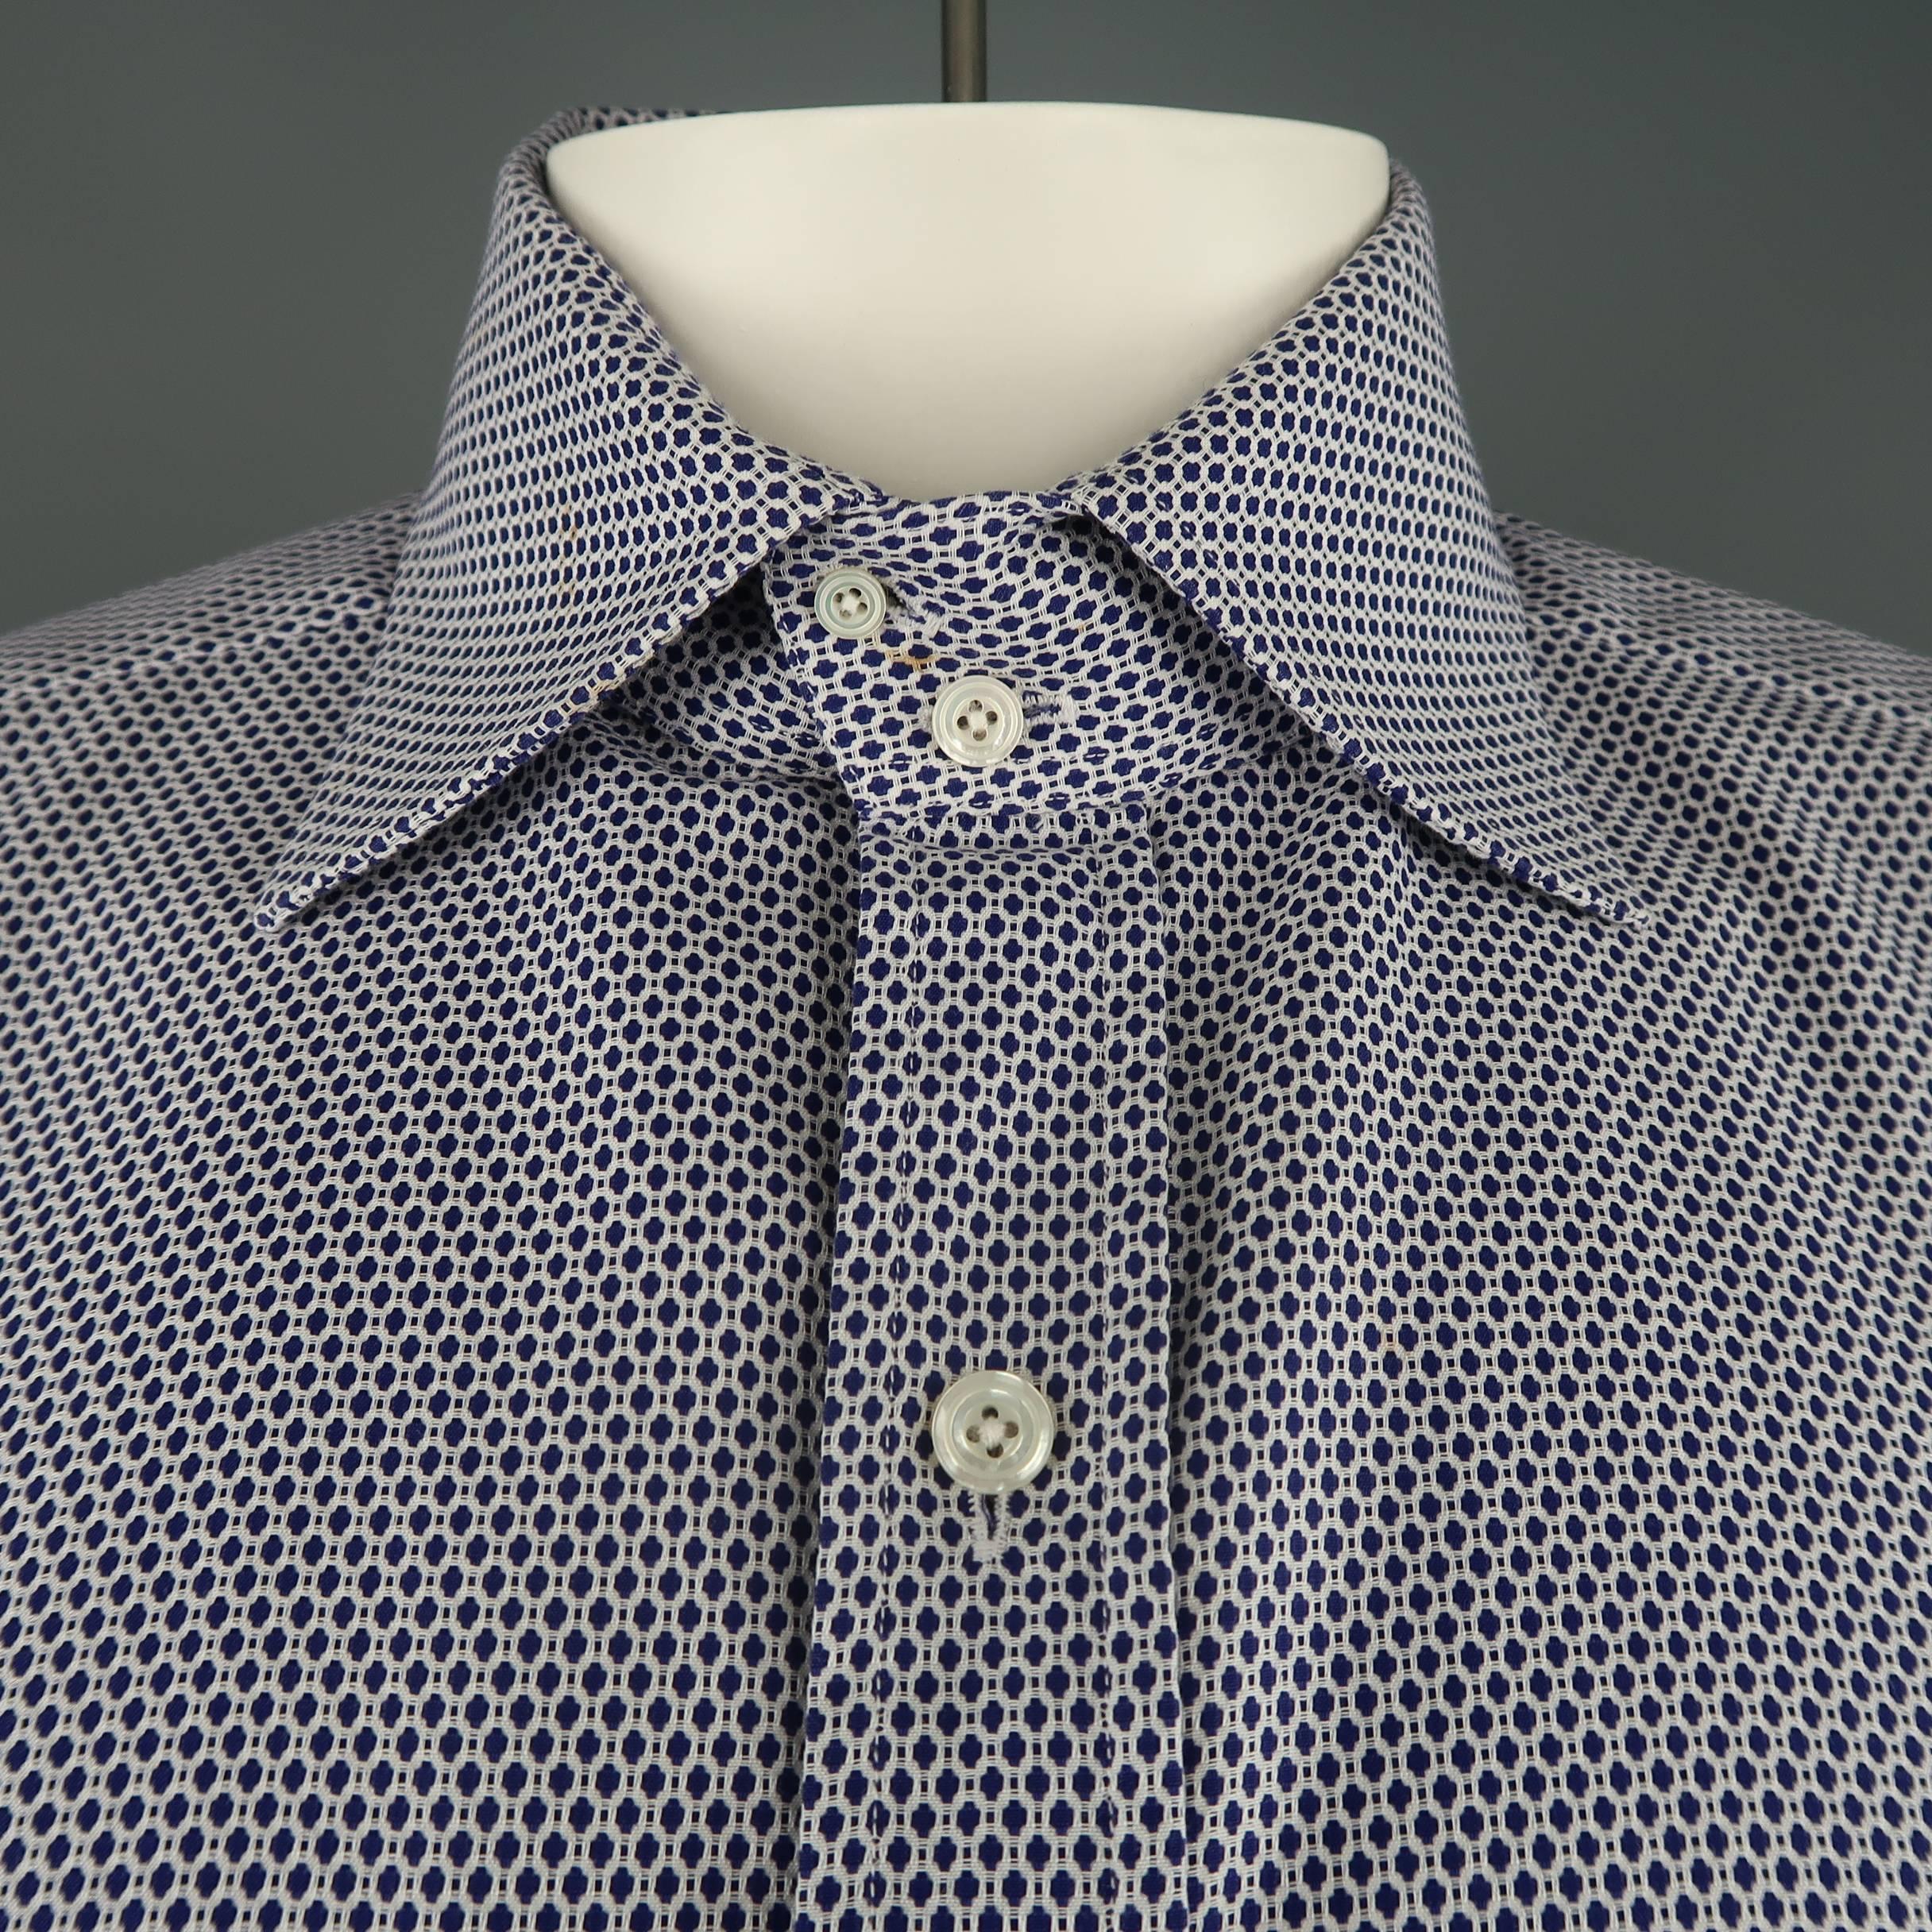 TOM FORD dress shirt comes in a navy and white pattern cotton with two button  spread collar. Small spot on collar. As-is. Made in Italy.
 
Fair Pre-Owned Condition.
Marked: 43  17
 
Measurements:
 
Shoulder: 19 in.
Chest: 46 in.
Sleeve: 26